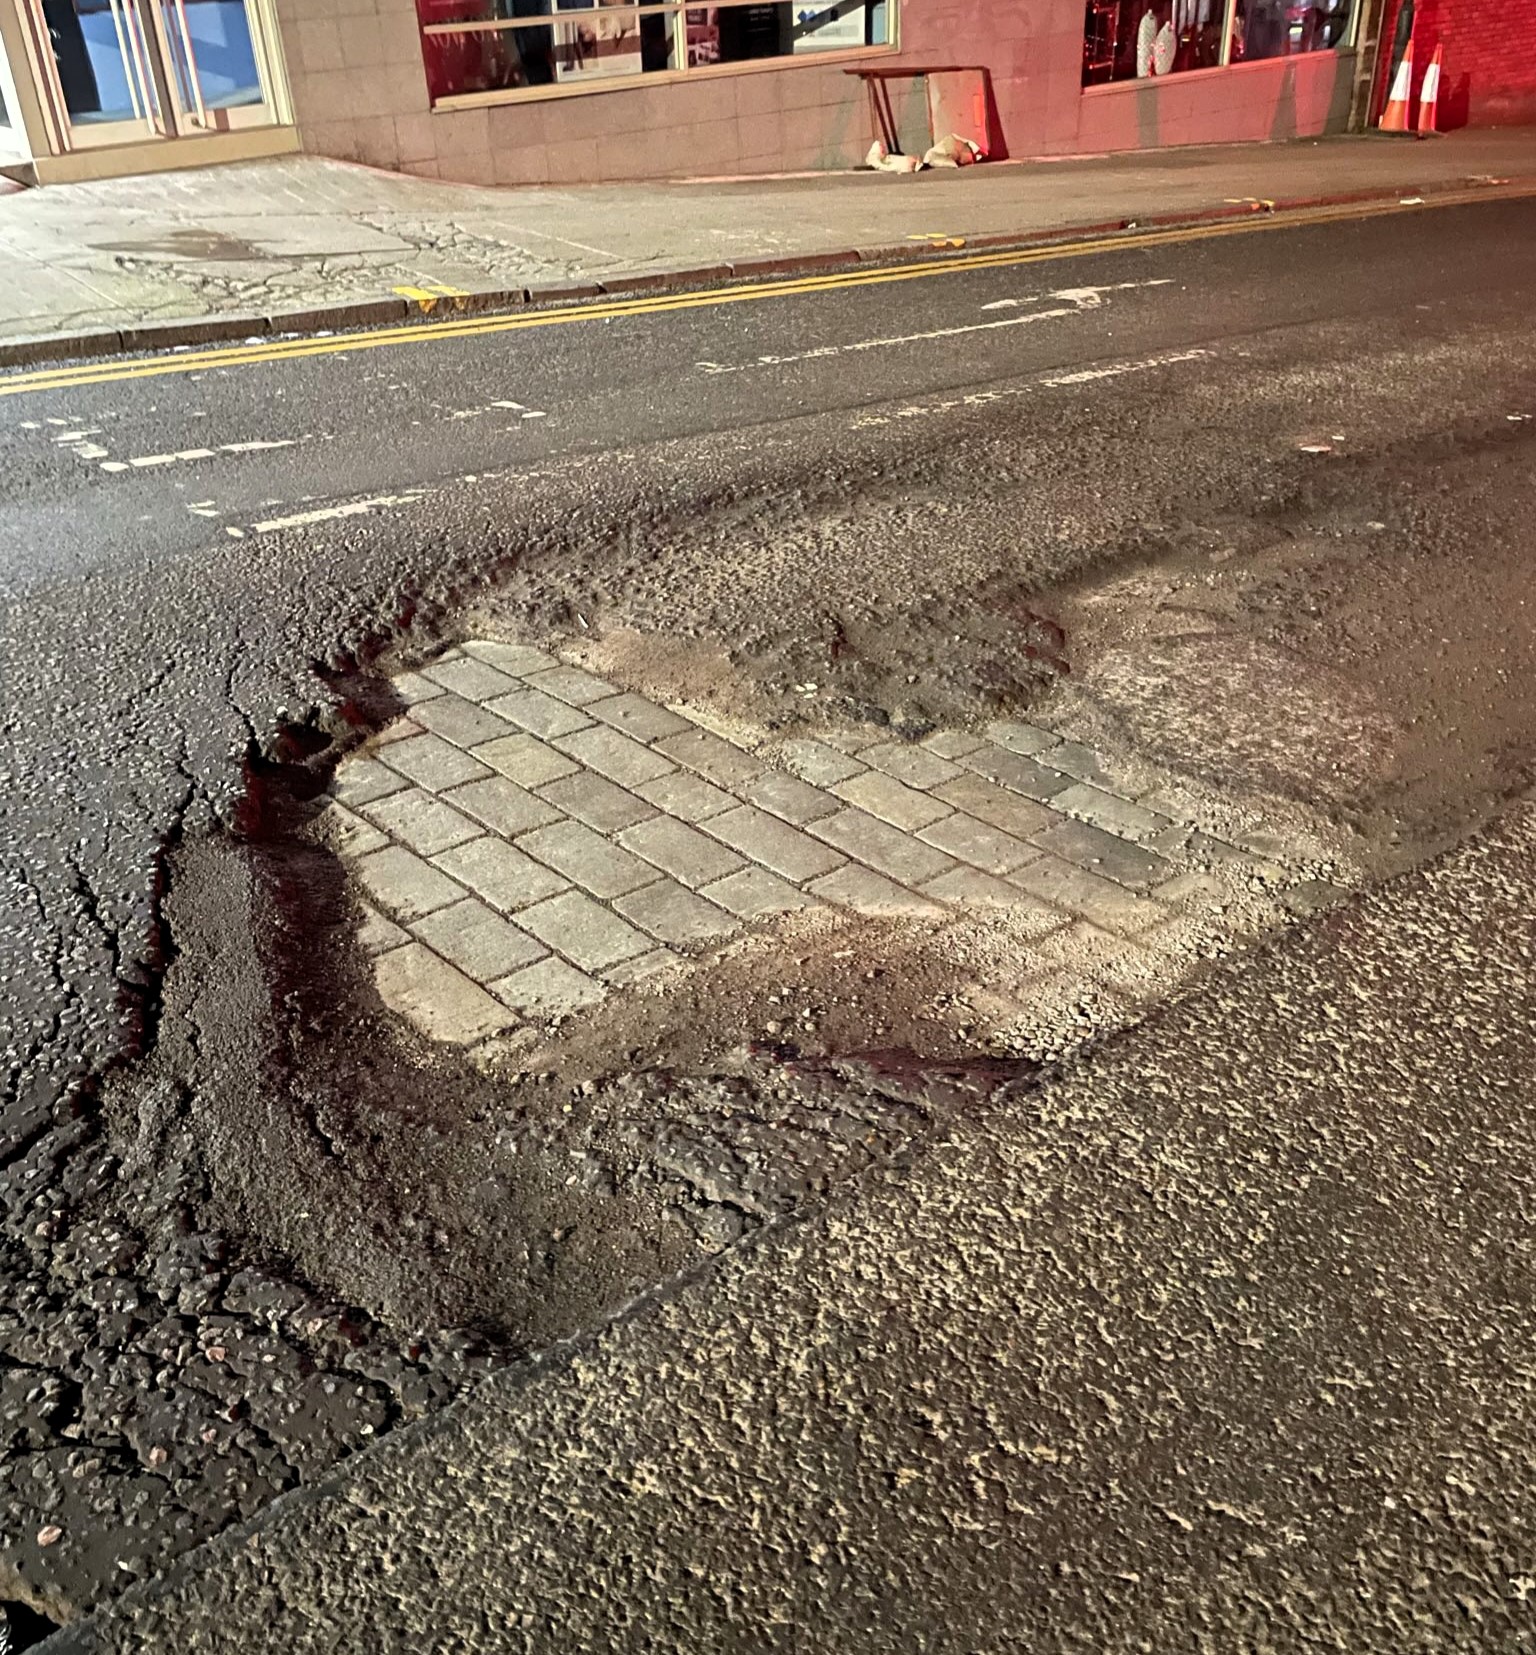 A massive pothole in Glasgow revealed a pristine Victorian cobbled street underneath, stunning motorists. The council swiftly repaired the road.